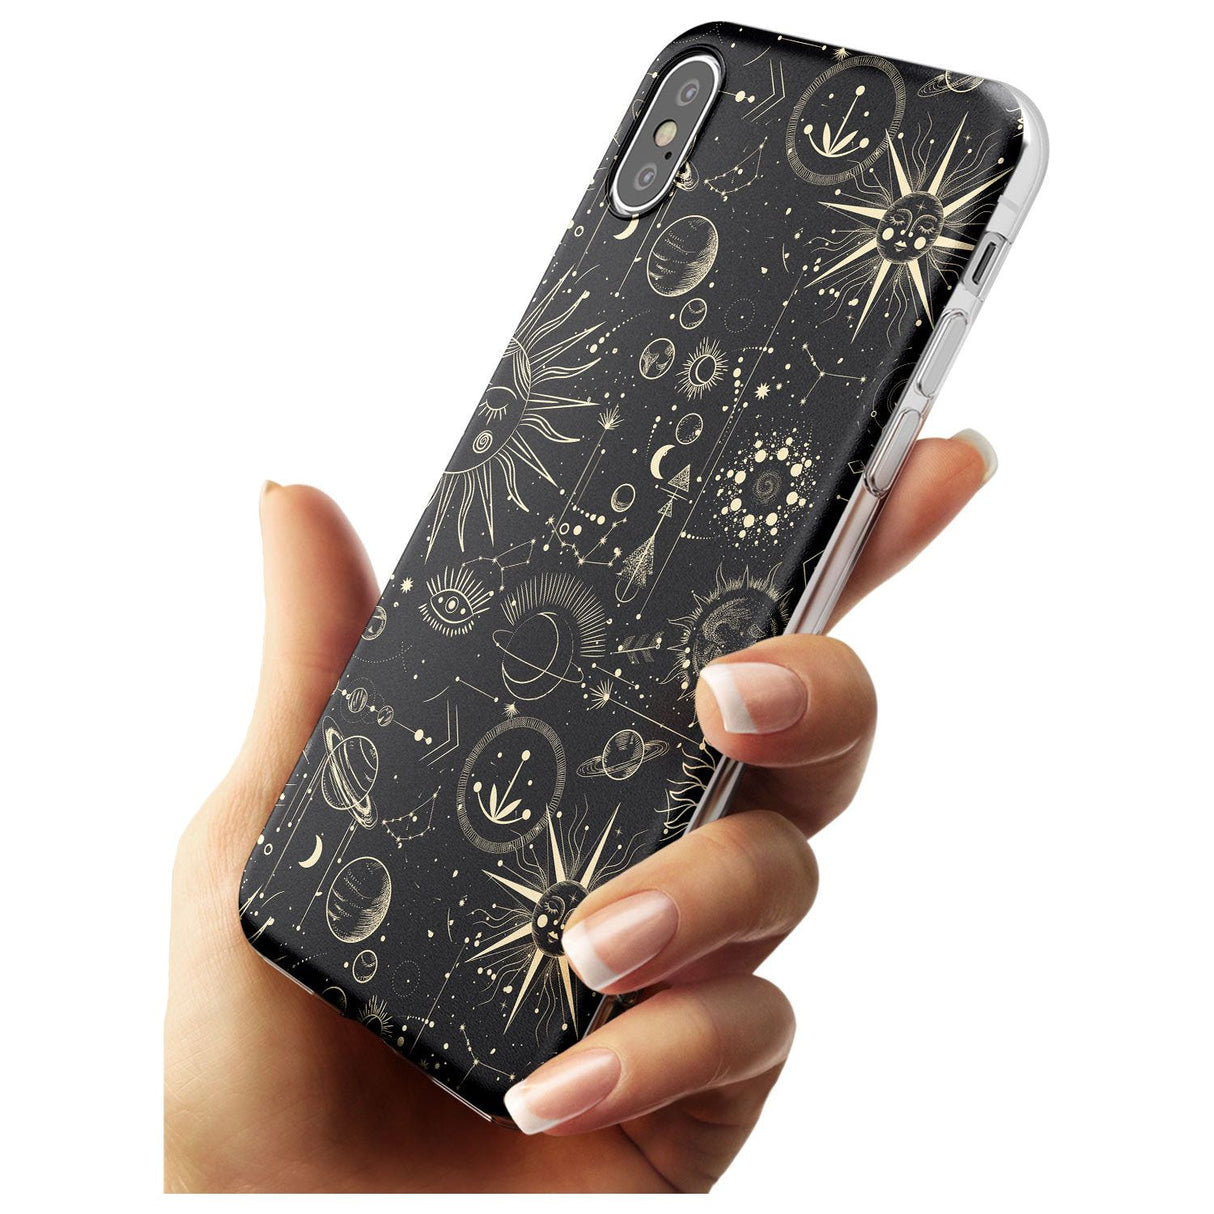 Suns & Planets Black Impact Phone Case for iPhone X XS Max XR